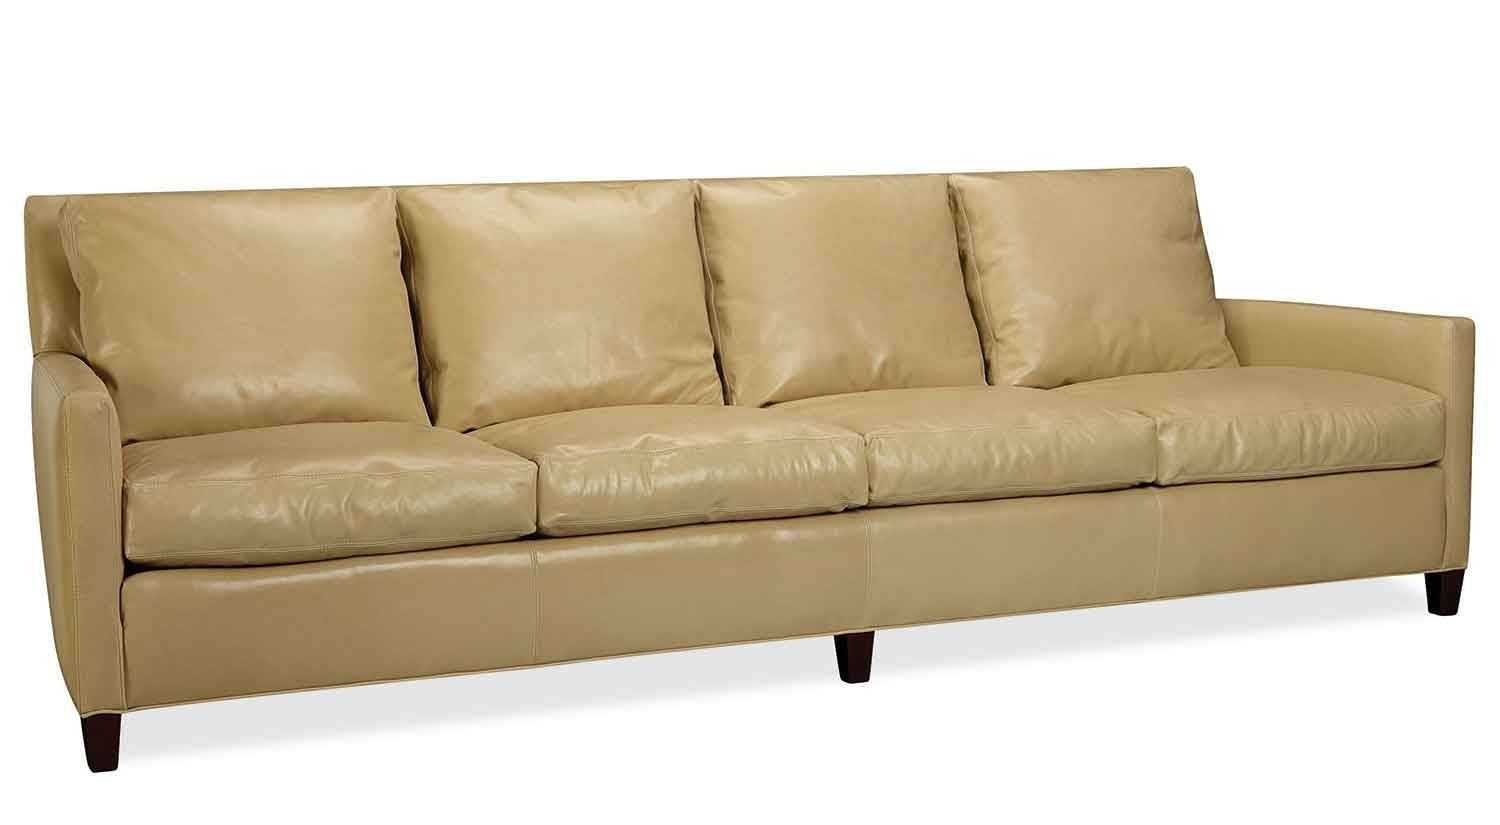 4 Seat Couch | Woodworking Plans Throughout 4 Seater Couch (Photo 233 of 299)